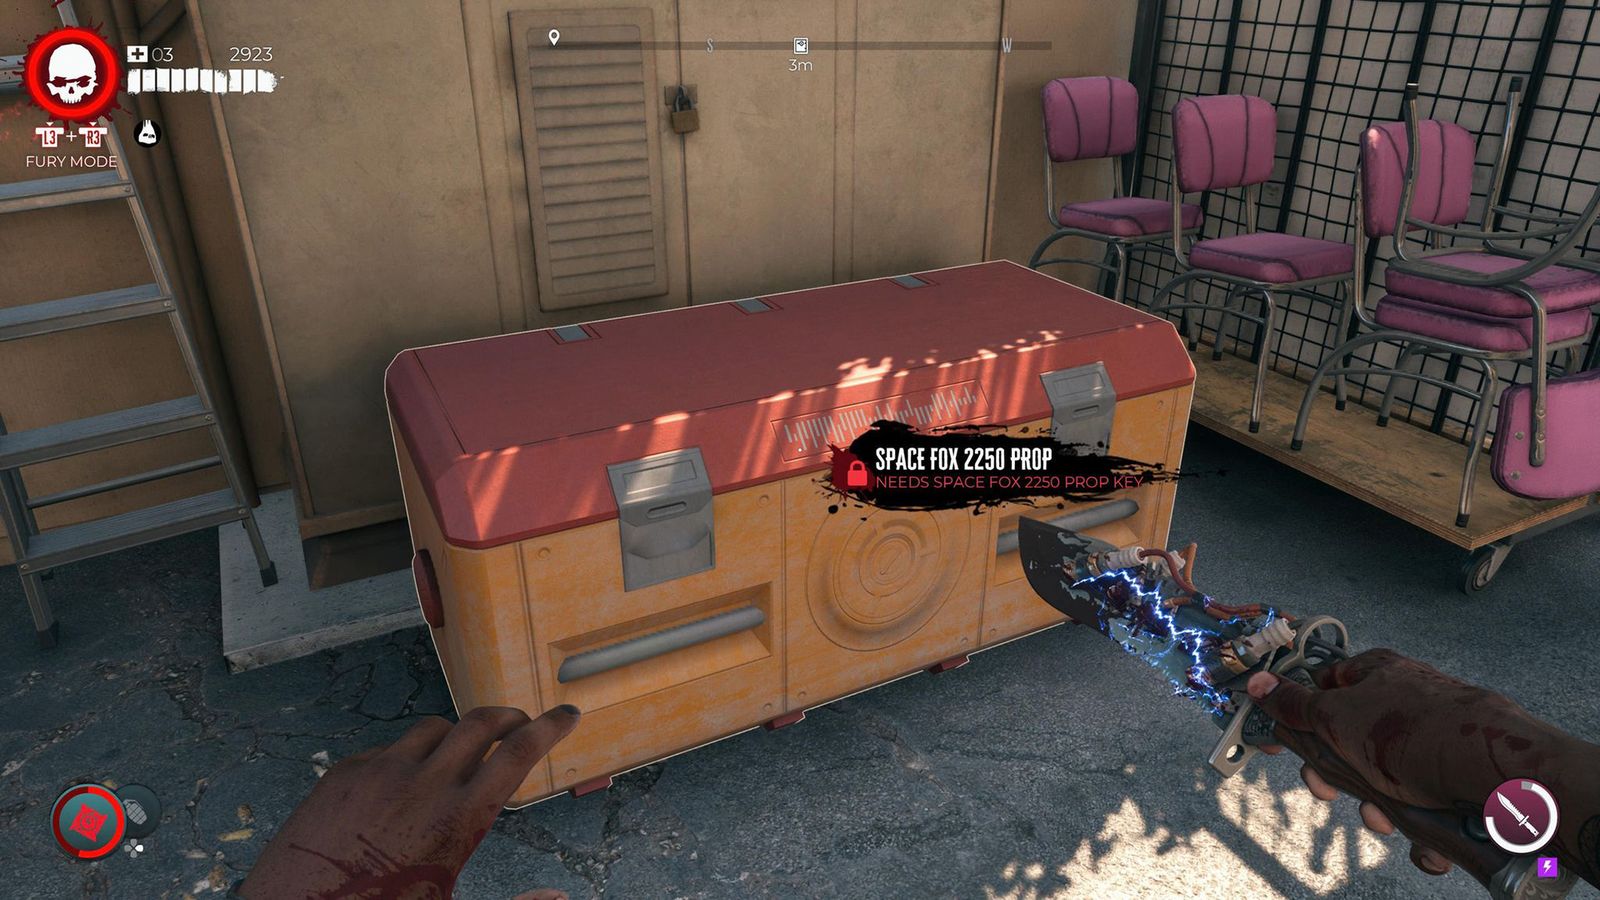 Space Fox 2250 Prop Container dead island 2